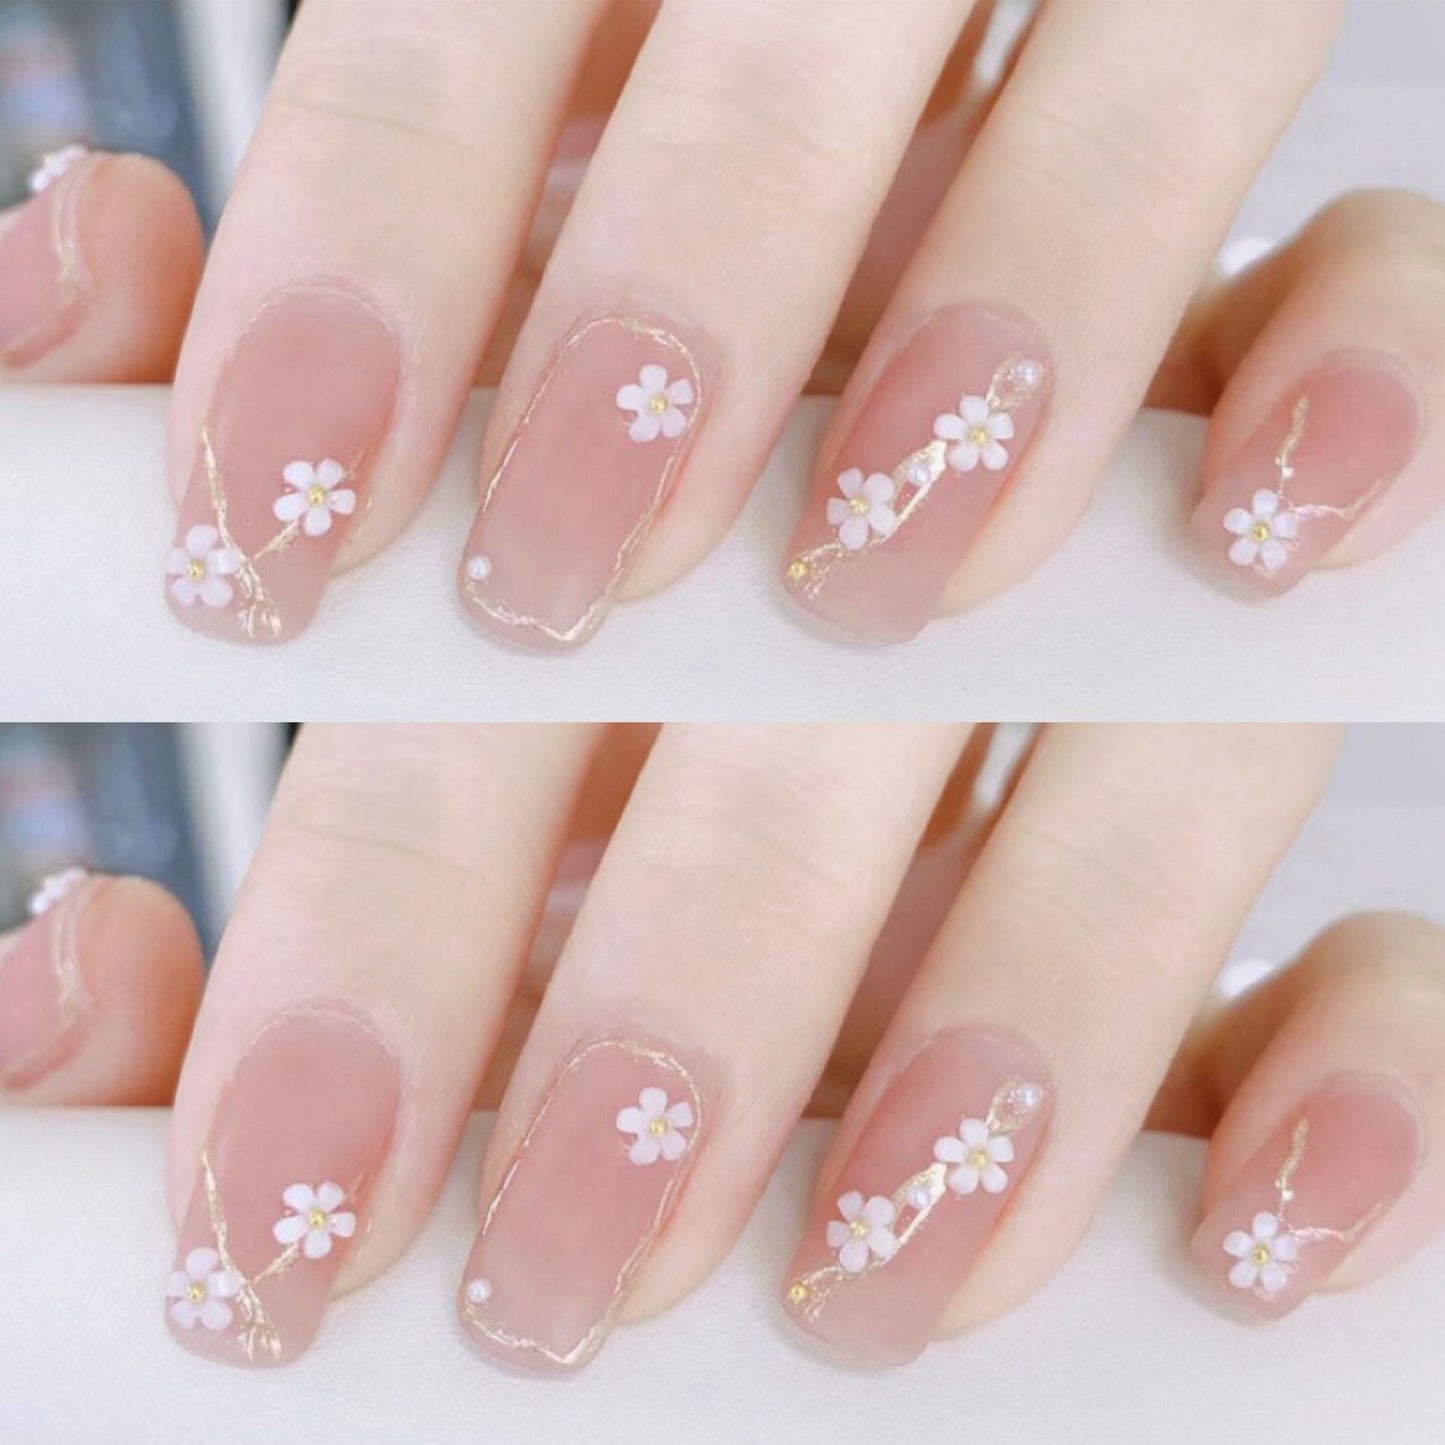 Spring Blossom Medium Square Beige Press On Nail Set with Floral Accents and Glitter Highlights